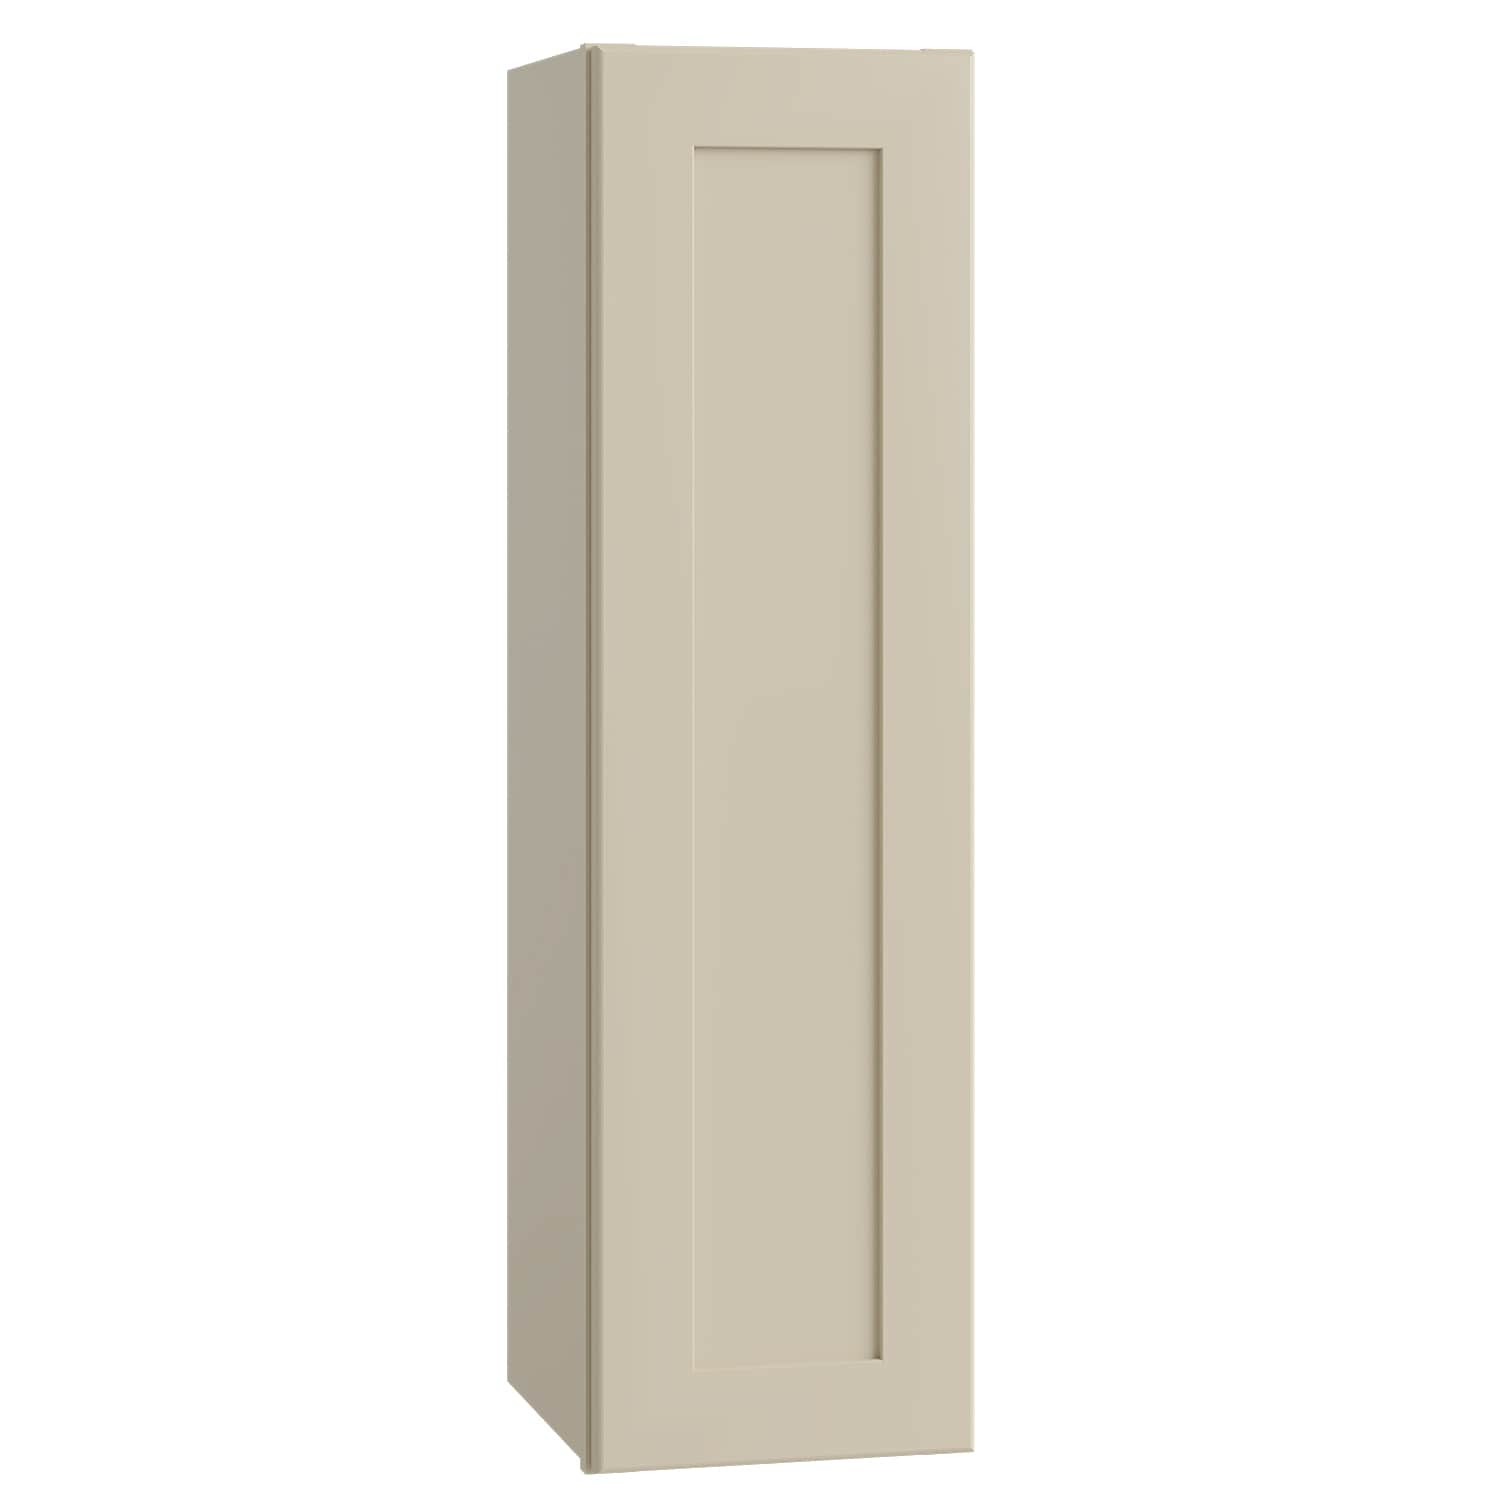 Luxxe Cabinetry 12-in W x 36-in H x 12-in D Norfolk Blended Cream Painted Door Wall Fully Assembled Semi-custom Cabinet in Off-White | W1236L-NBC